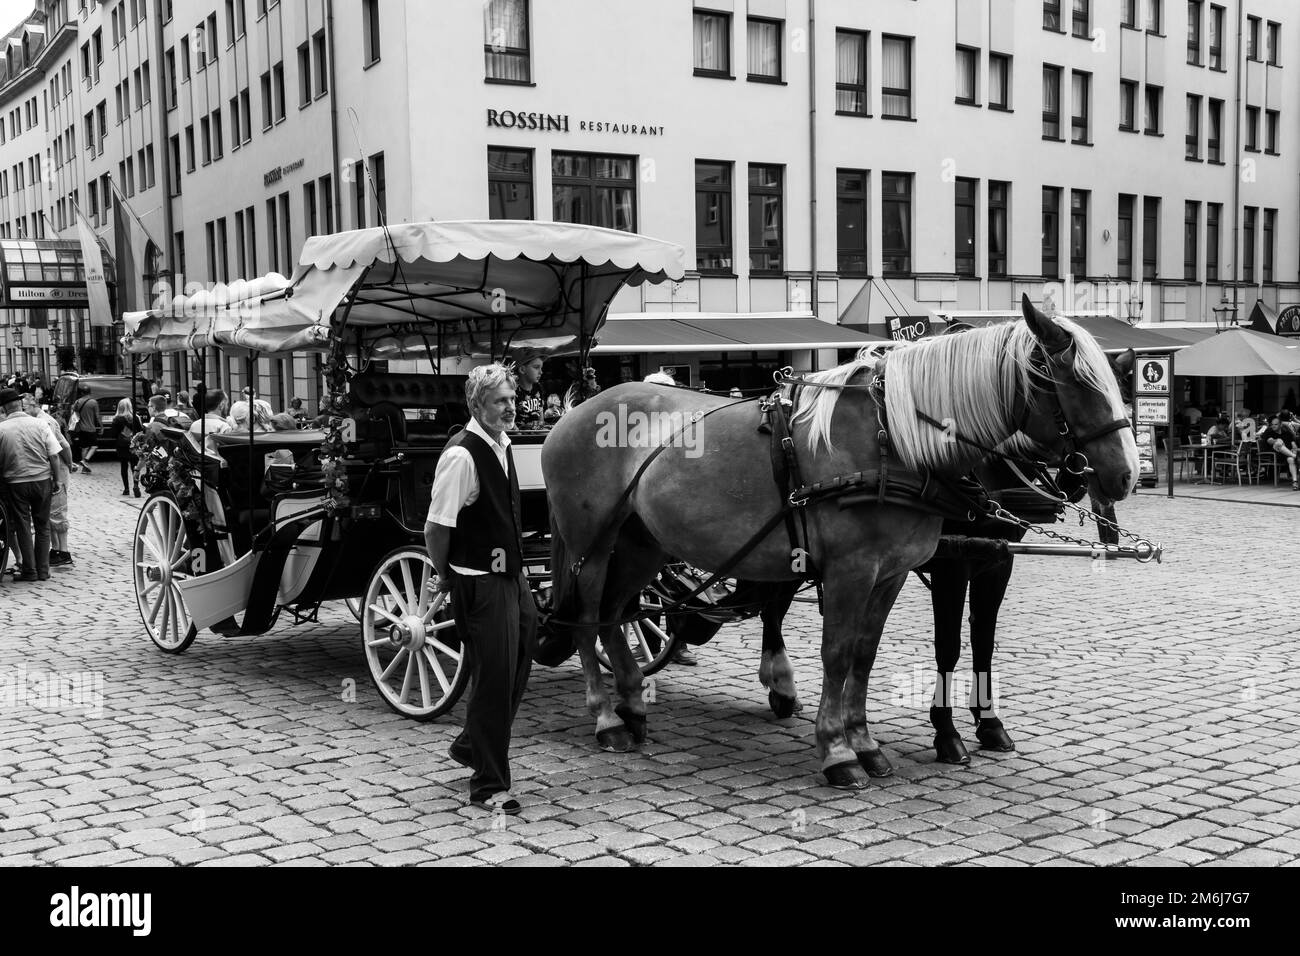 A A monochrome image of a horse and carriage with owner waiting for customers on cobbled street in Dresden, Saxony, Germany Stock Photo